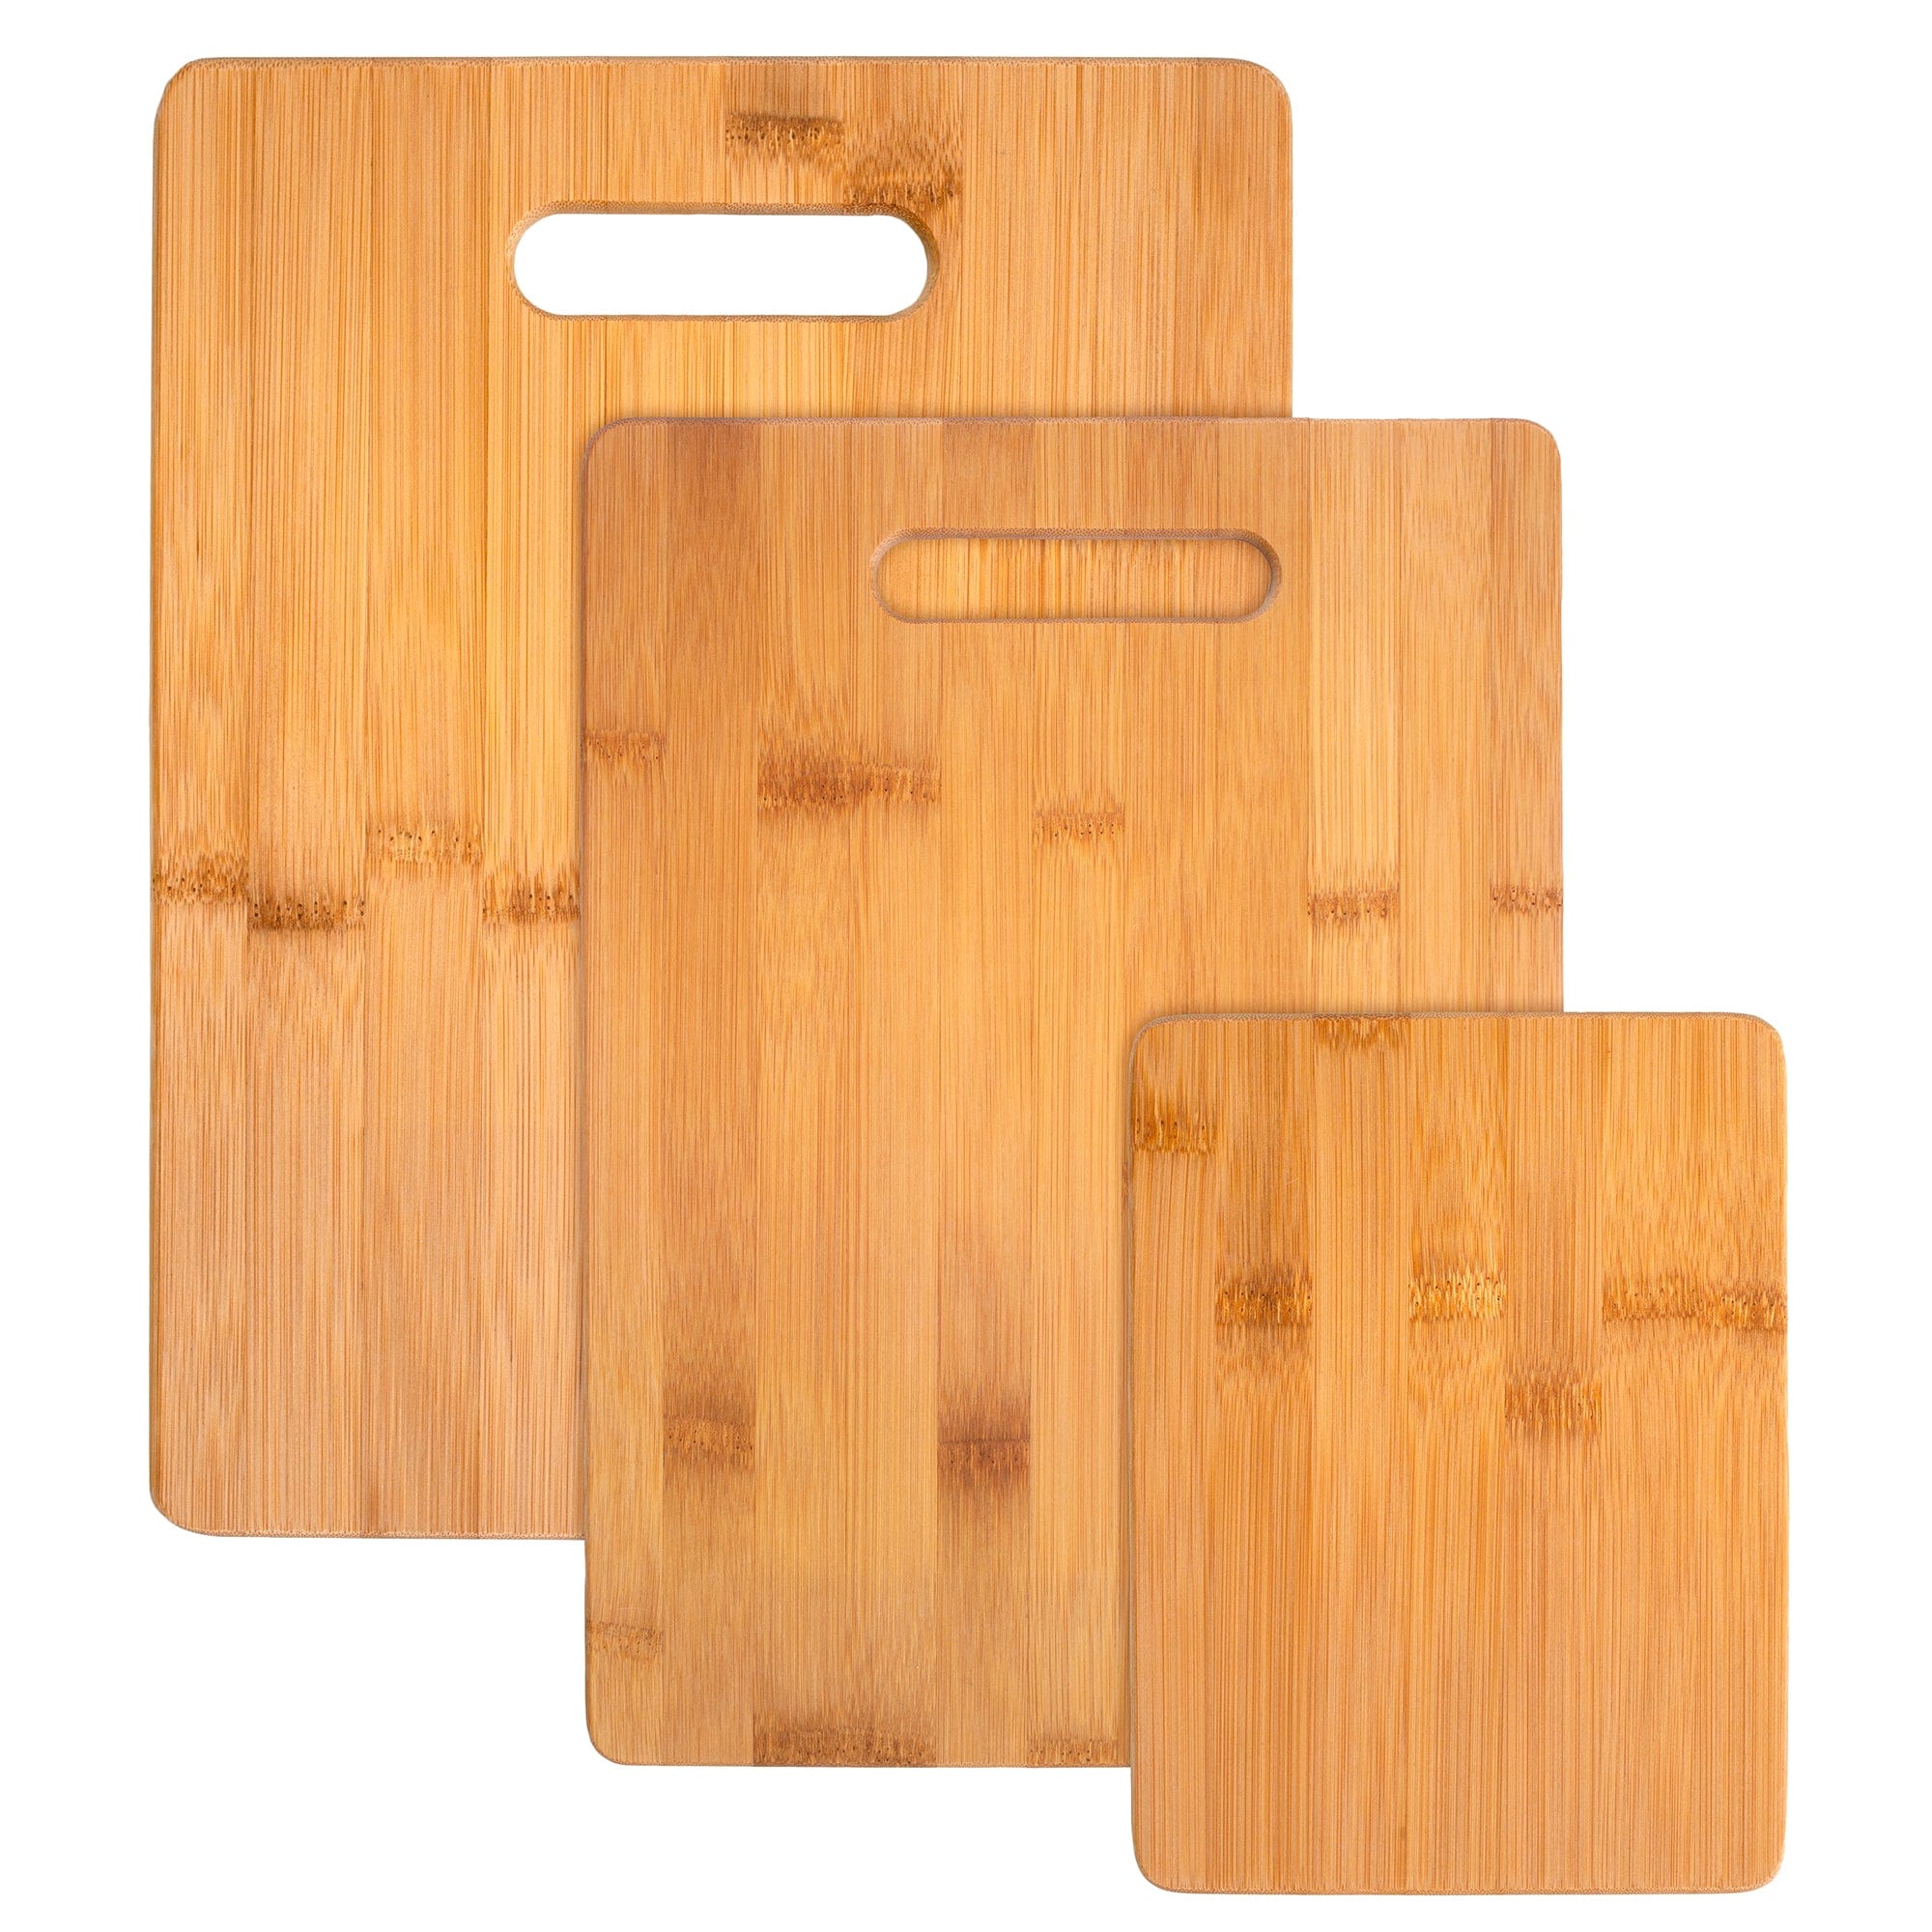 Totally Bamboo 3-Piece Bamboo Cutting Board Set, 13" x 9-1/2", 11" x 8-1/2" and 8" x 6"